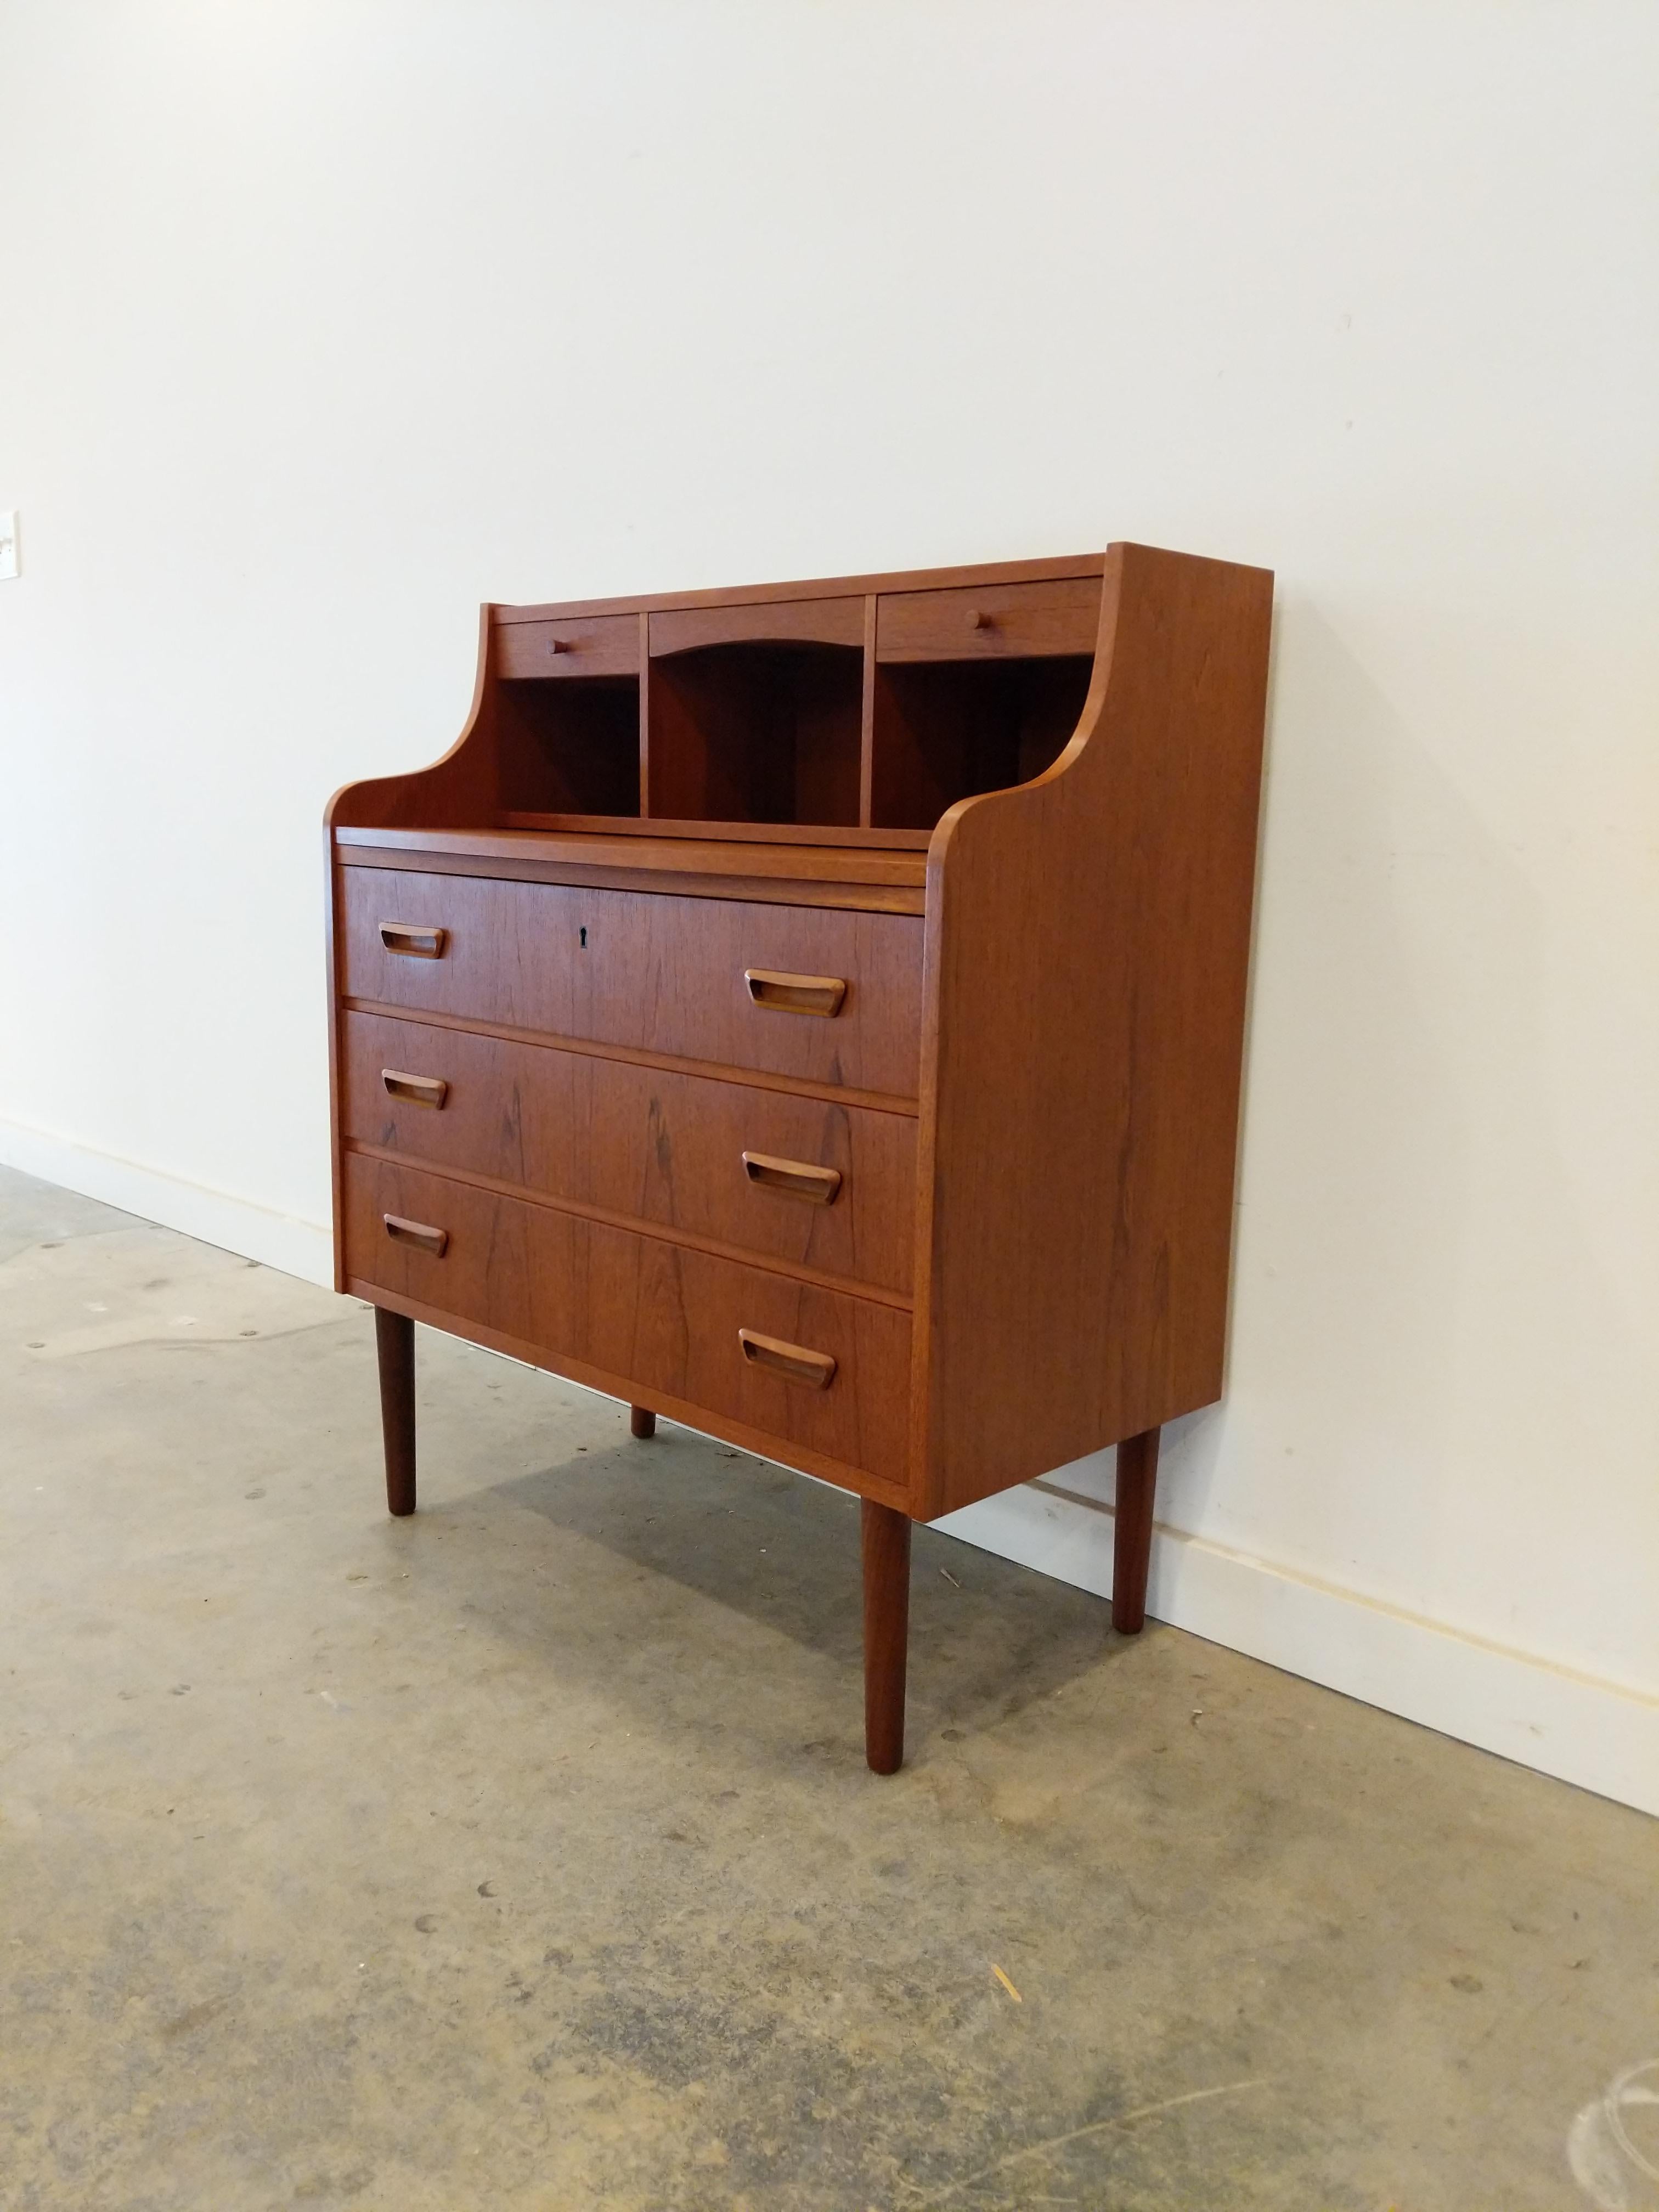 Authentic vintage mid century Danish / Scandinavian Modern teak secretary desk / vanity with mirror.

This piece is in excellent refinished condition with very few signs of age-related wear (see photos).

If you would like any additional details,